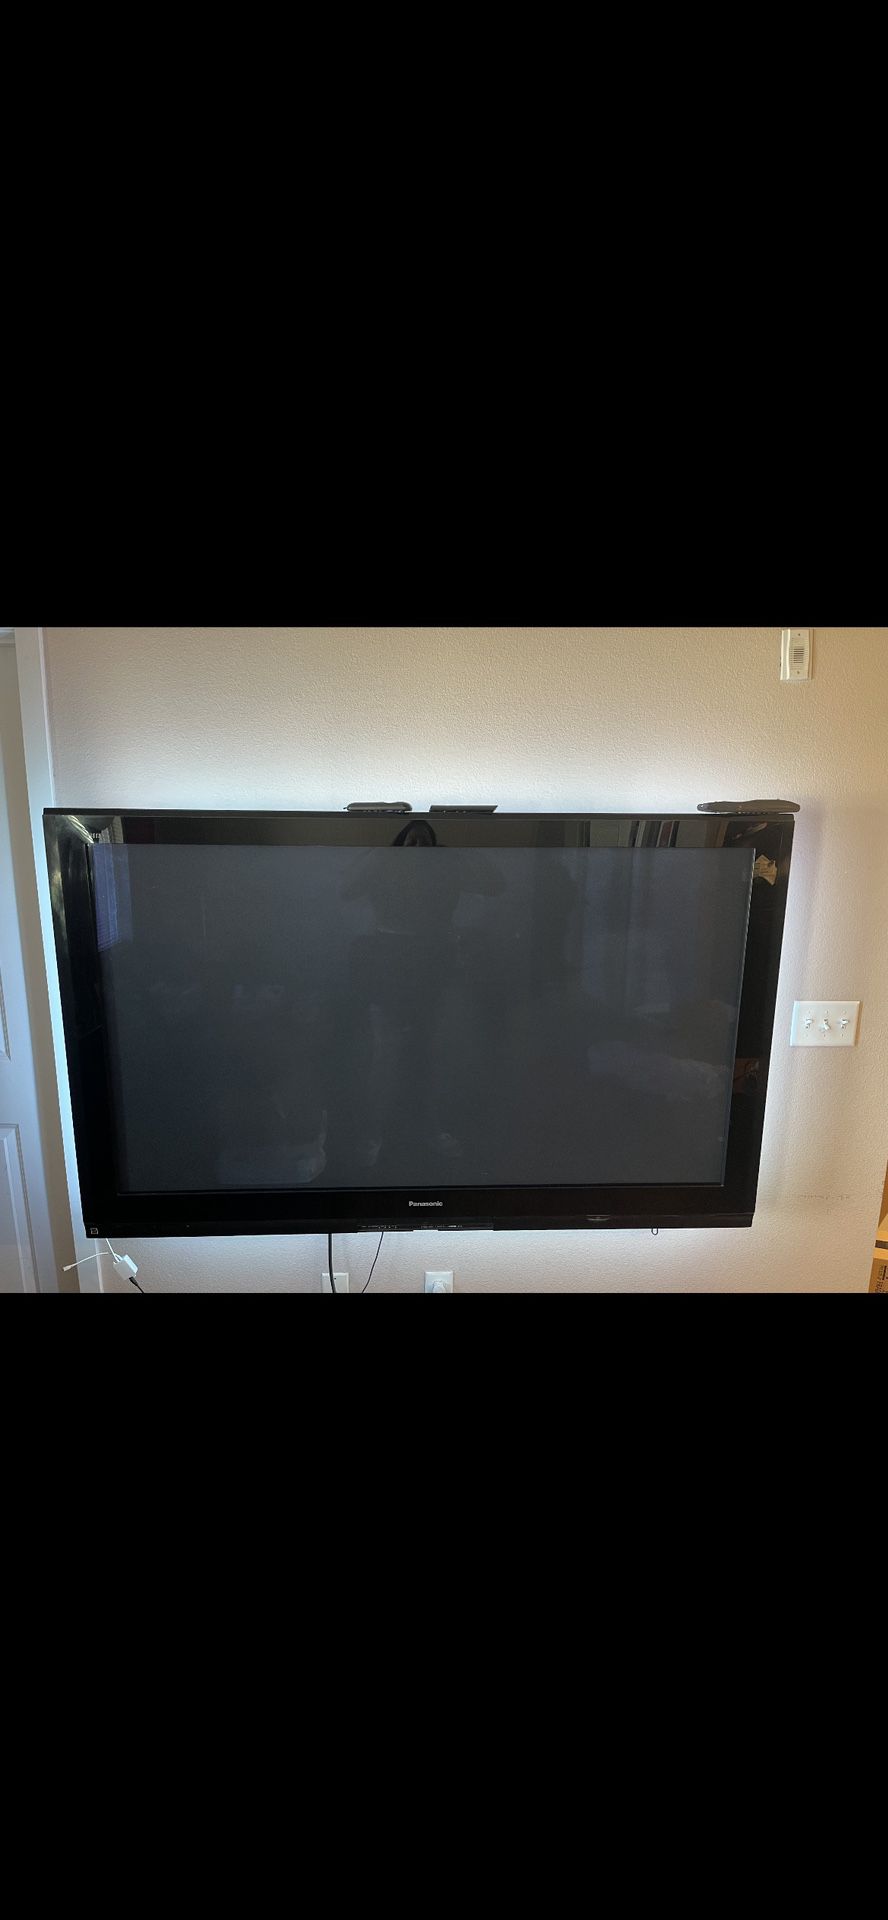 70 Inch Flat Screen Tv with Built In Surround Sound.